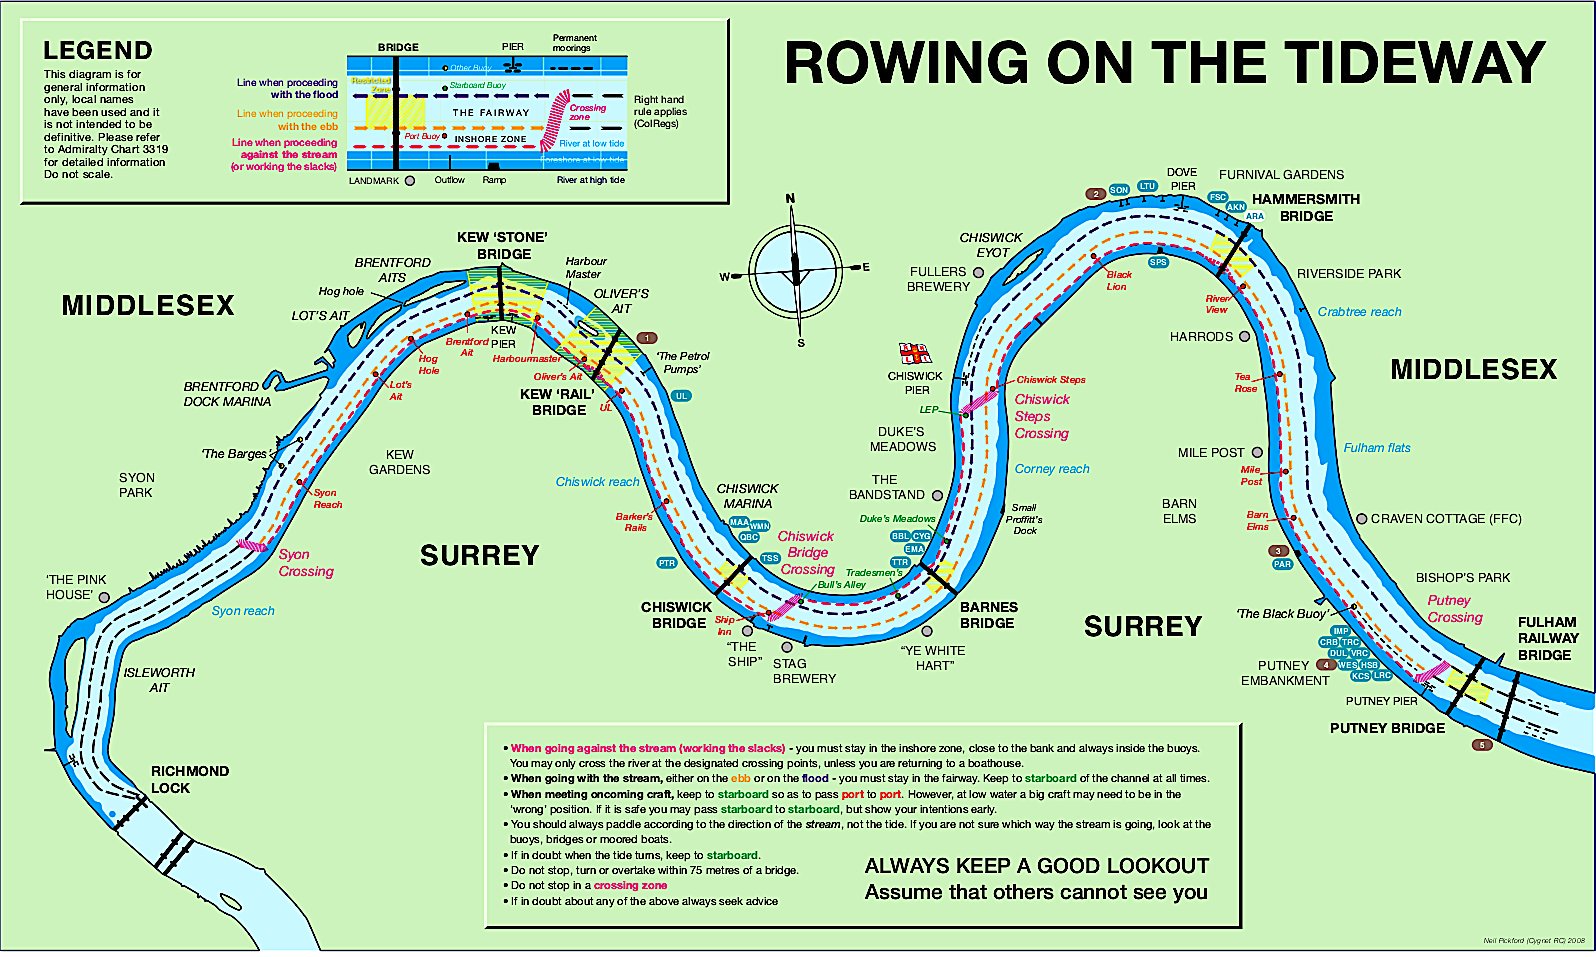 Rowing on the Tideway map